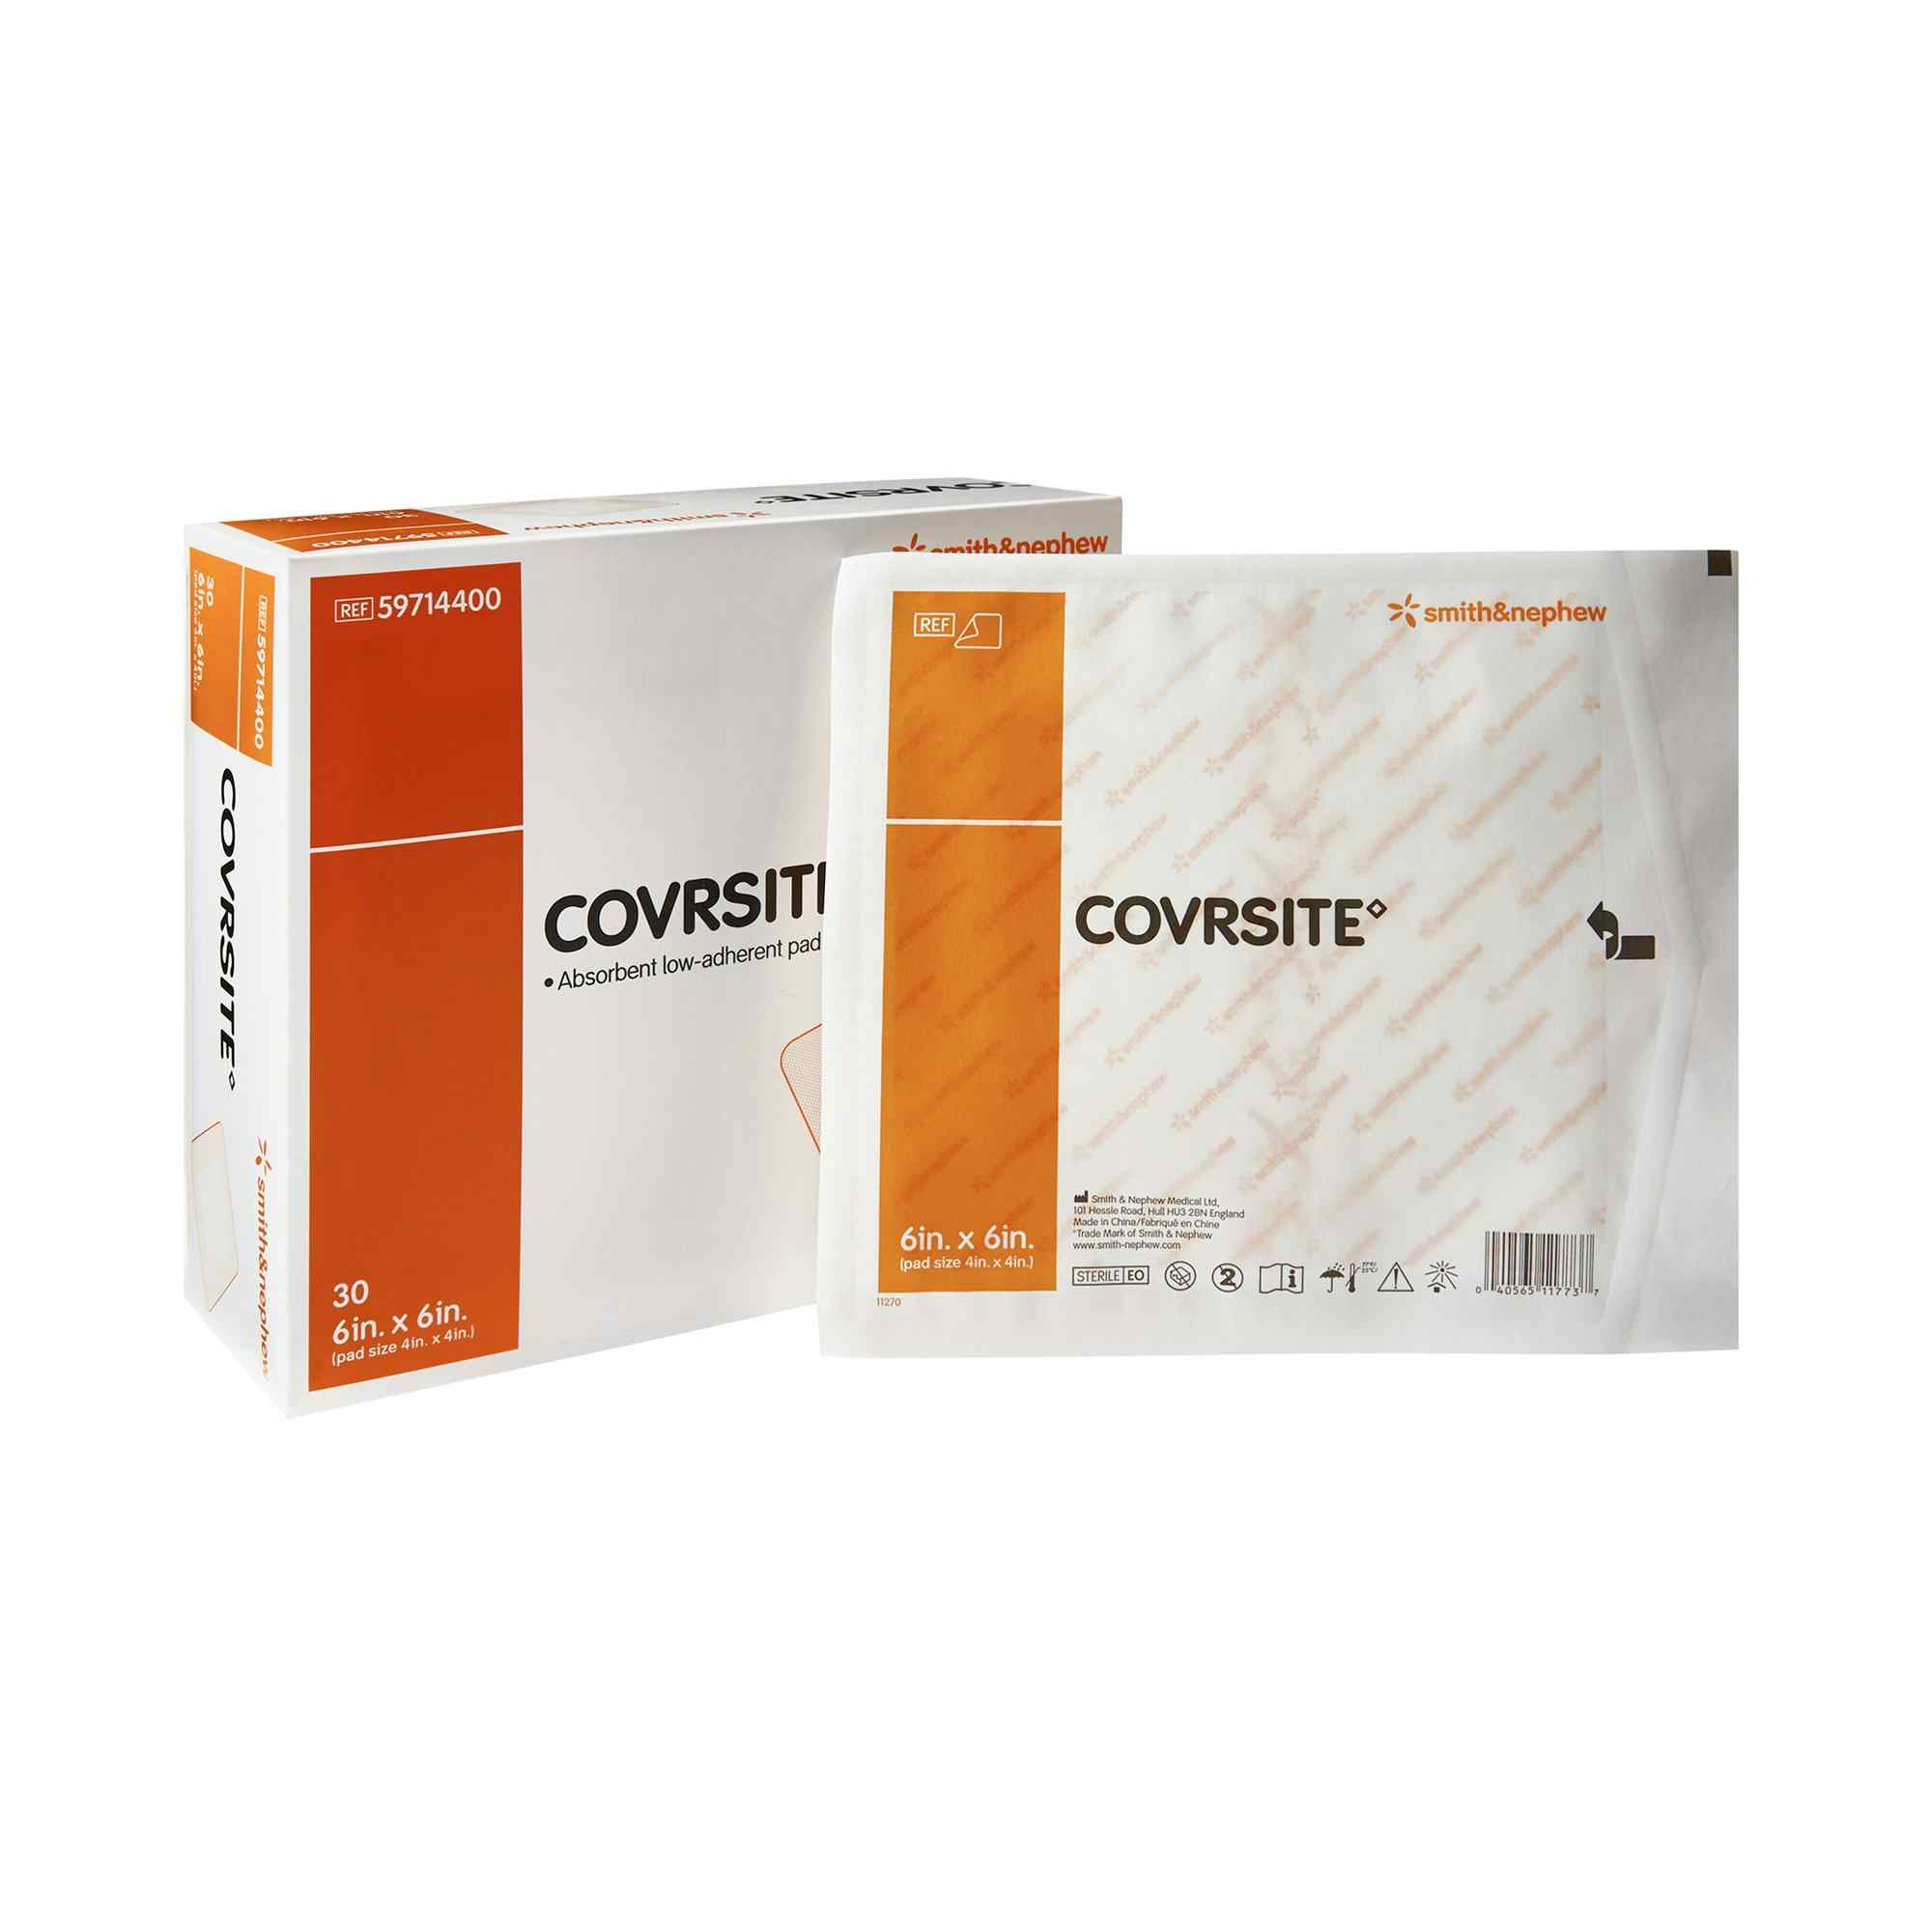 Coversite Cover Dressing, 6 X 6", 59714400, Box of 30